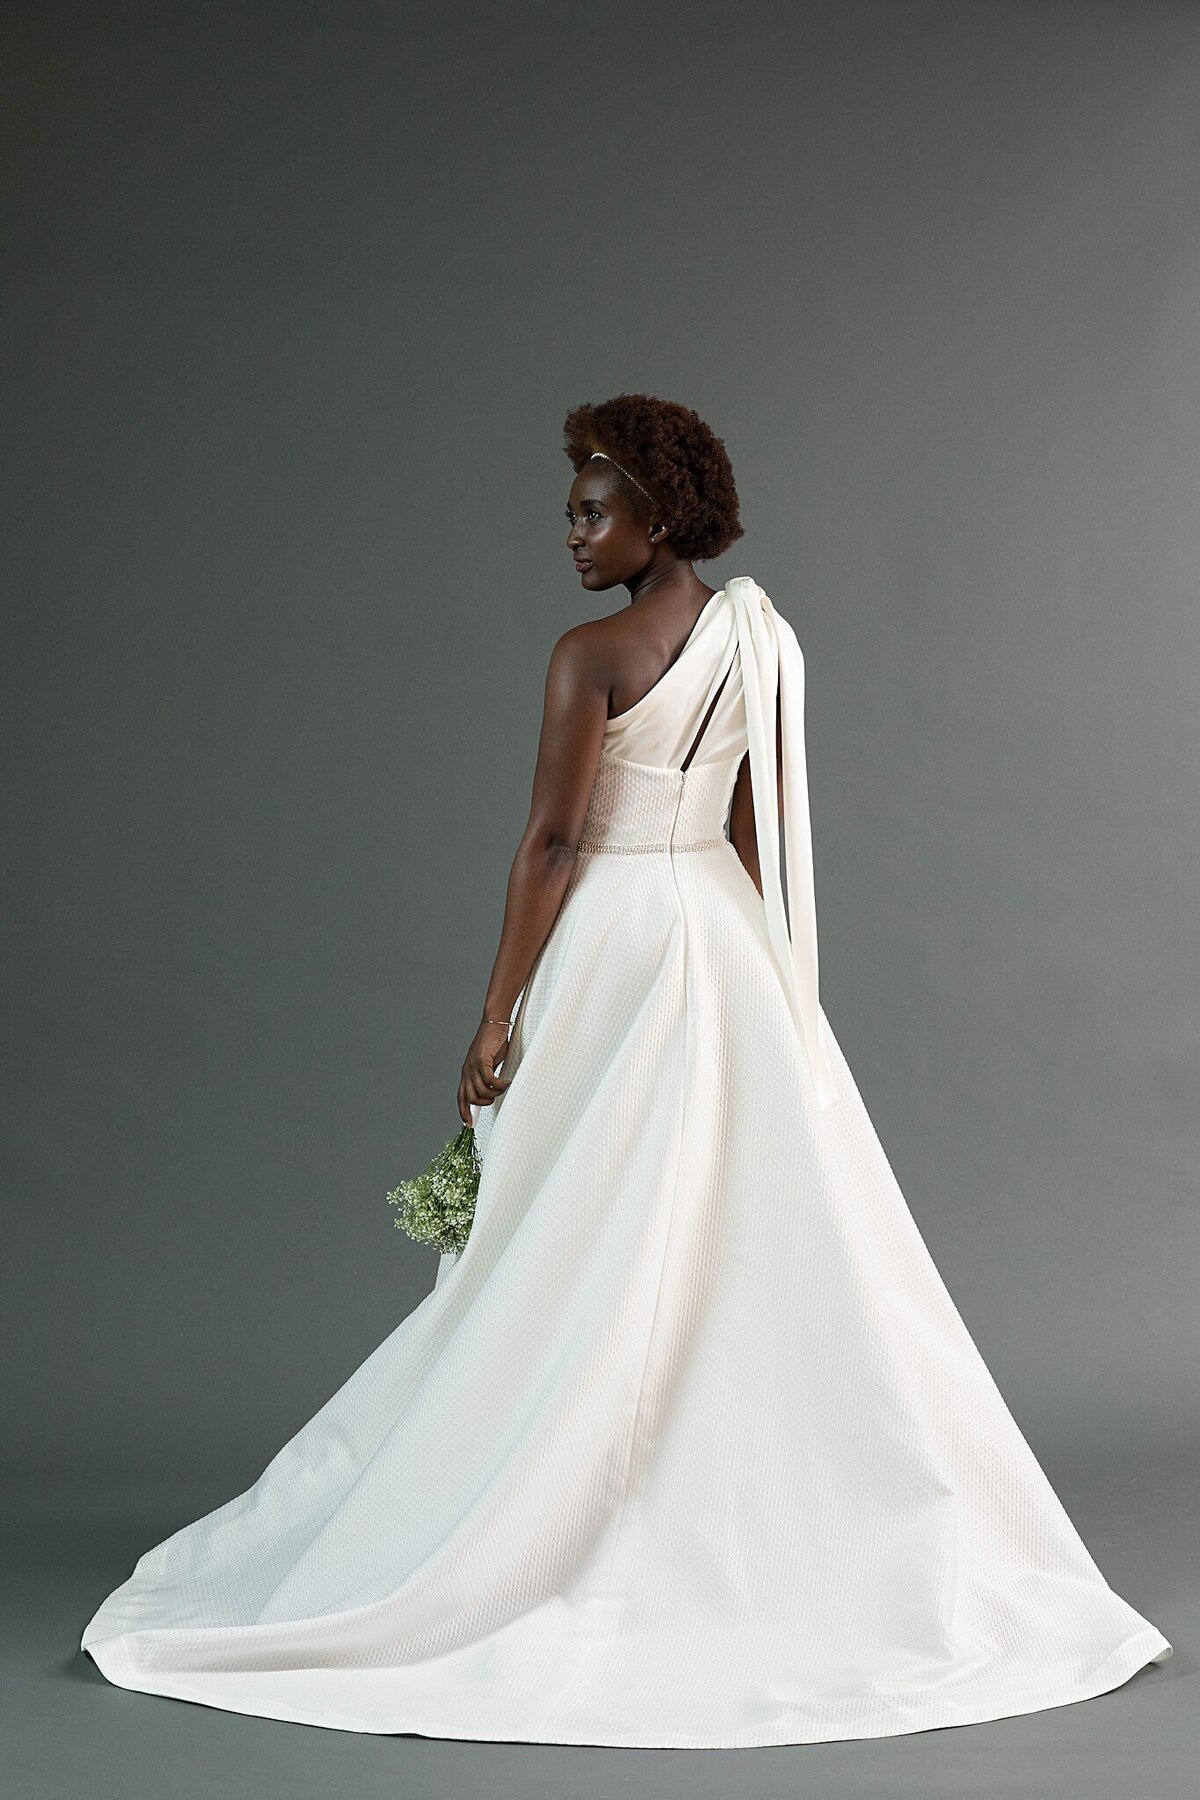 The Kimi style is a one-shoulder wedding gown is a design by indie bridal designer Edith Elan who is based in Charleston, SC.